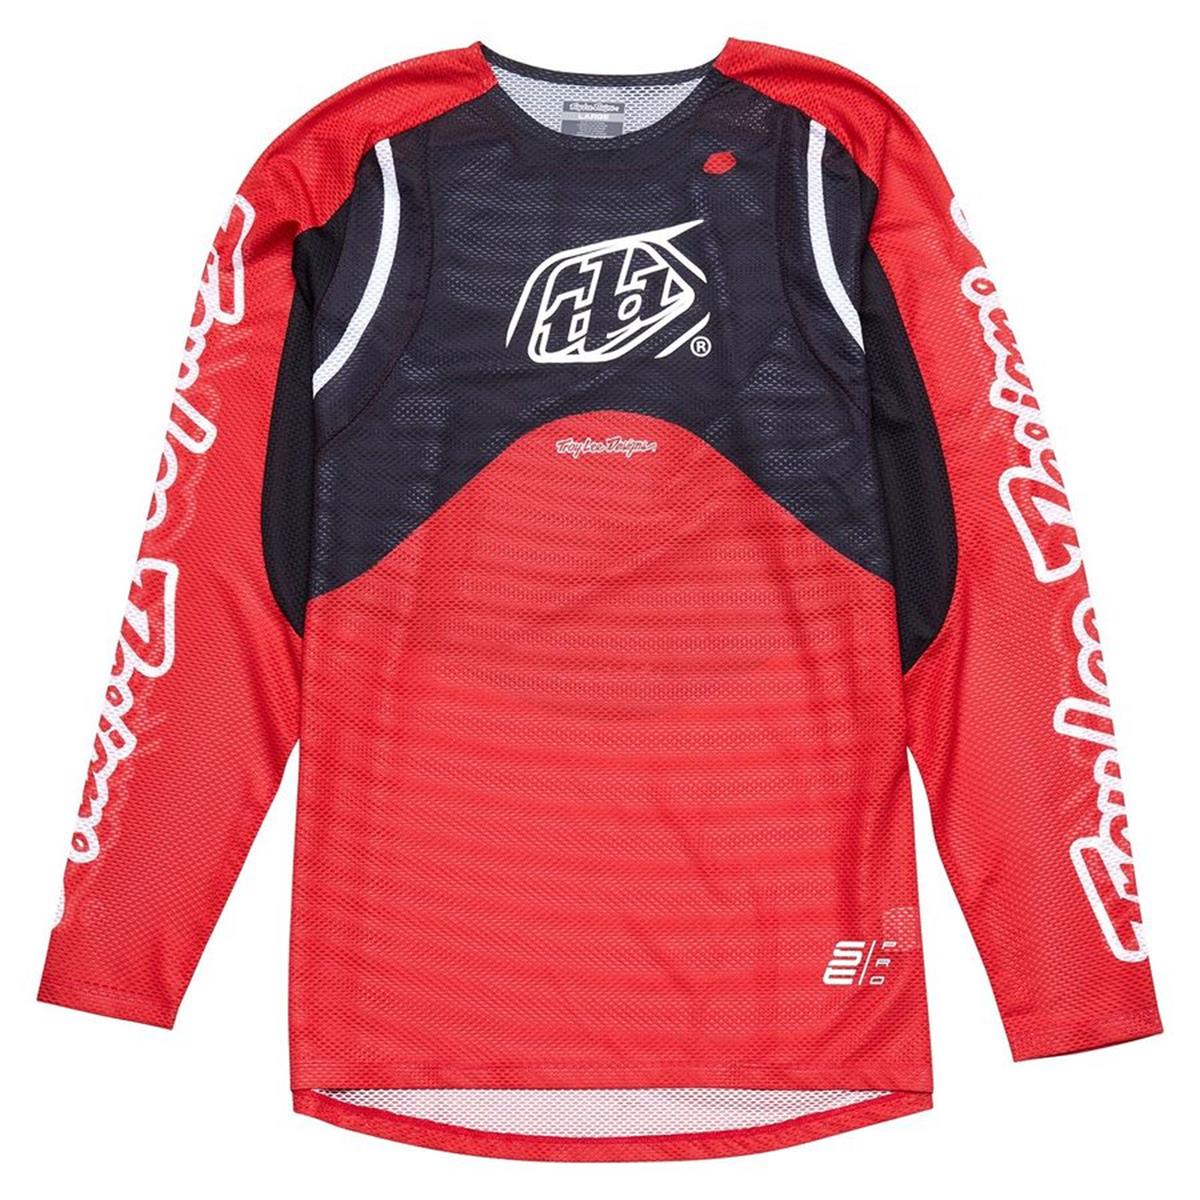 Troy Lee Designs Maglie MX SE Pro Pinned - Rosso